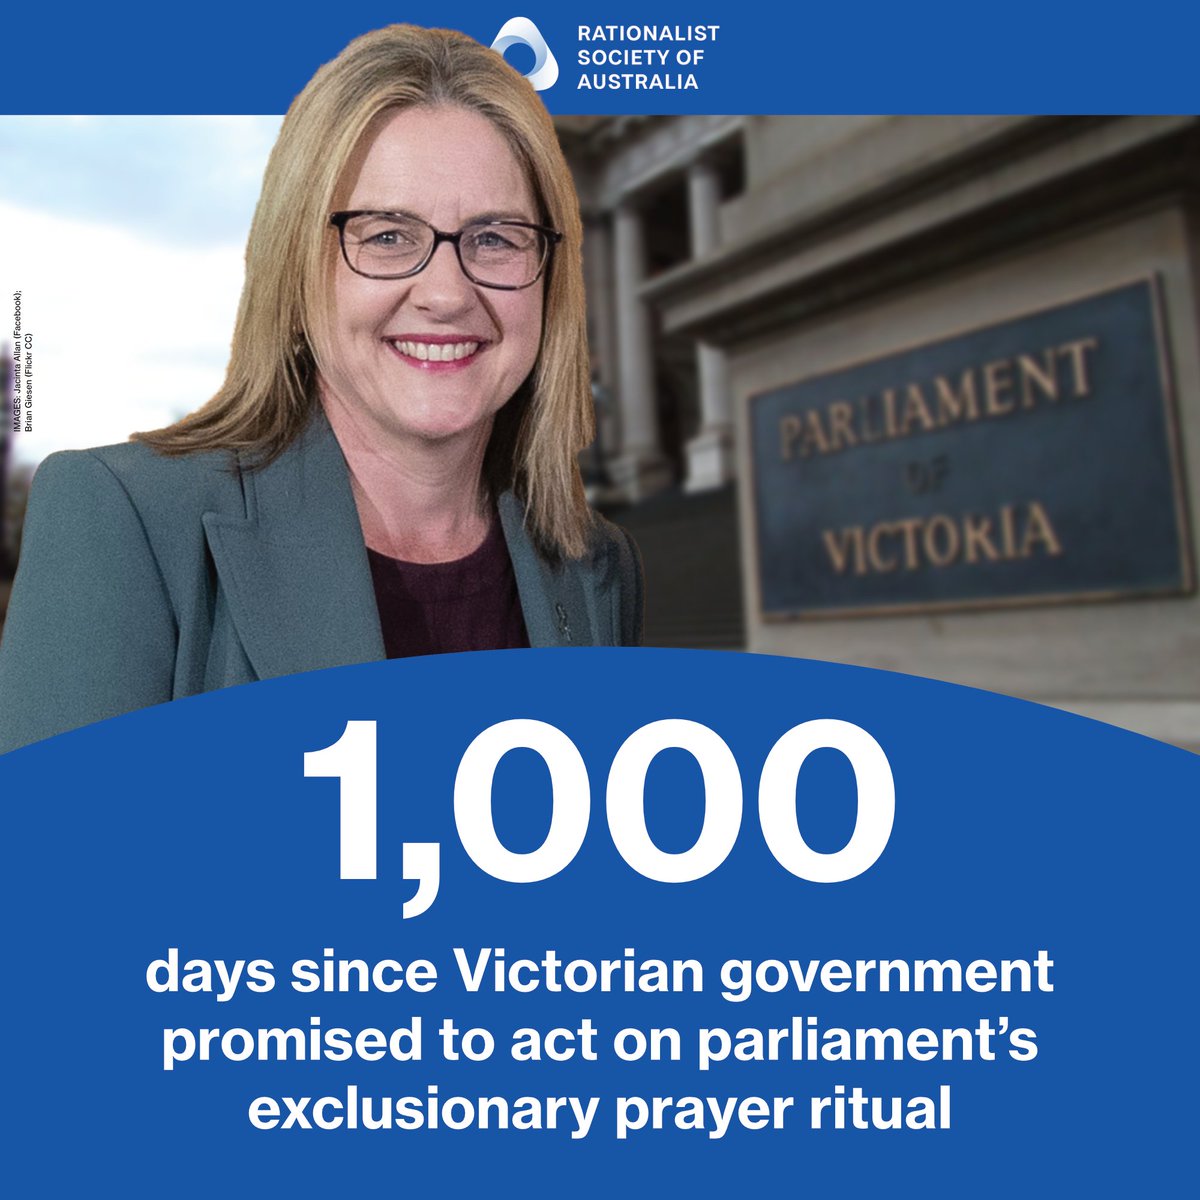 1,000 days ago, the Victorian Labor government promised to replace the state parliament’s Christian prayer rituals with something more appropriate and reflective of the community. Yet nothing has happened. Follow our campaign: #SpringSt @JacintaAllanMP @JaclynSymes